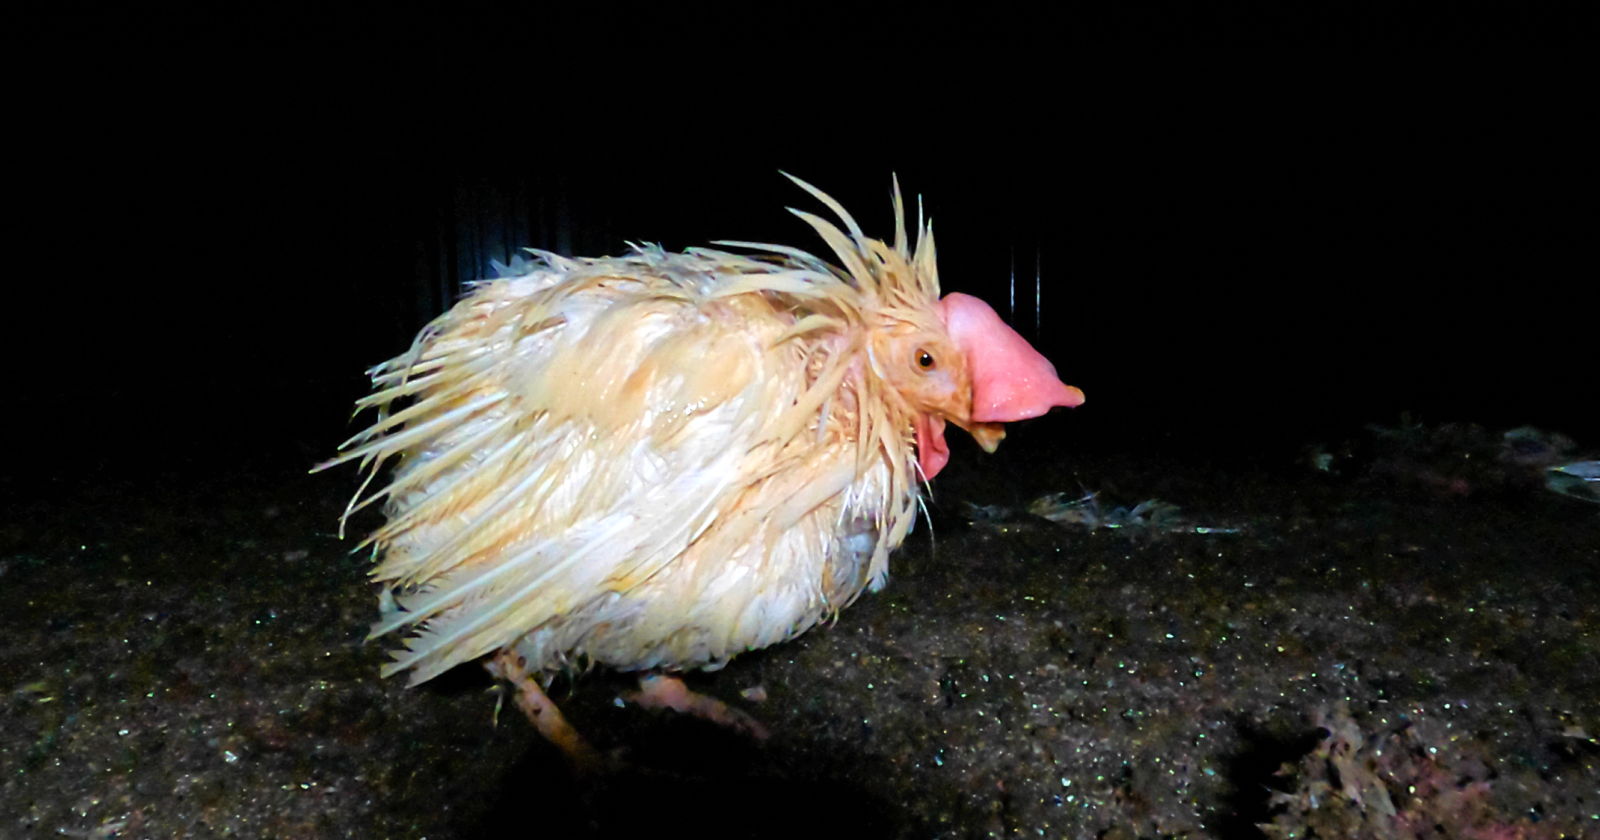 Weak hen with missing feathers standing in the darkness